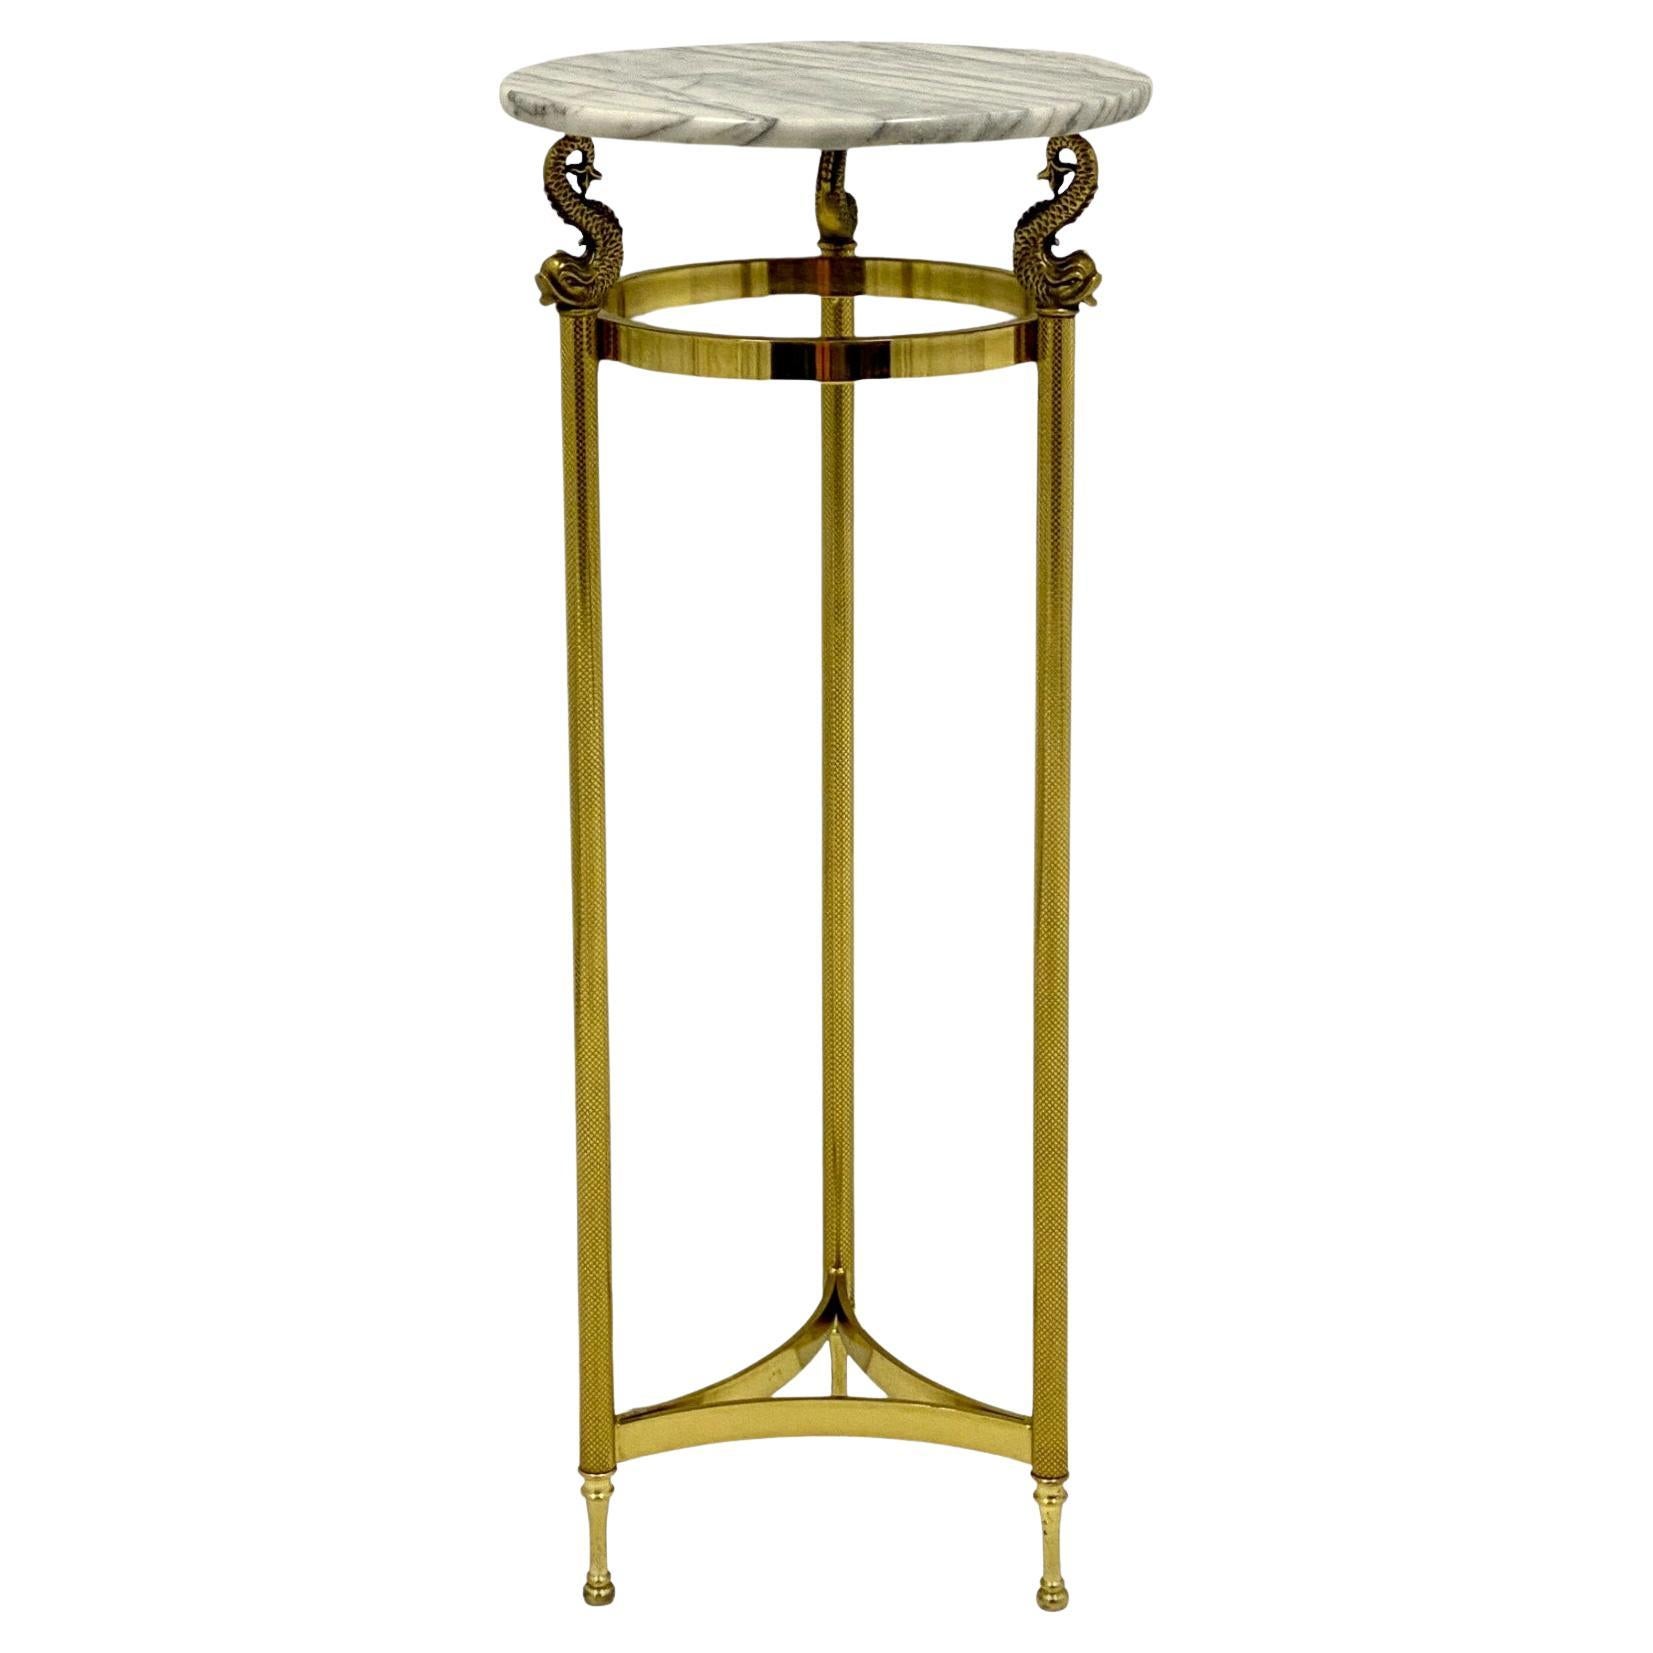 This is a timeless 1970s marble top brass pedestal with white marble top in very good condition. The top is not attached but is original. It is purported to be Italian.